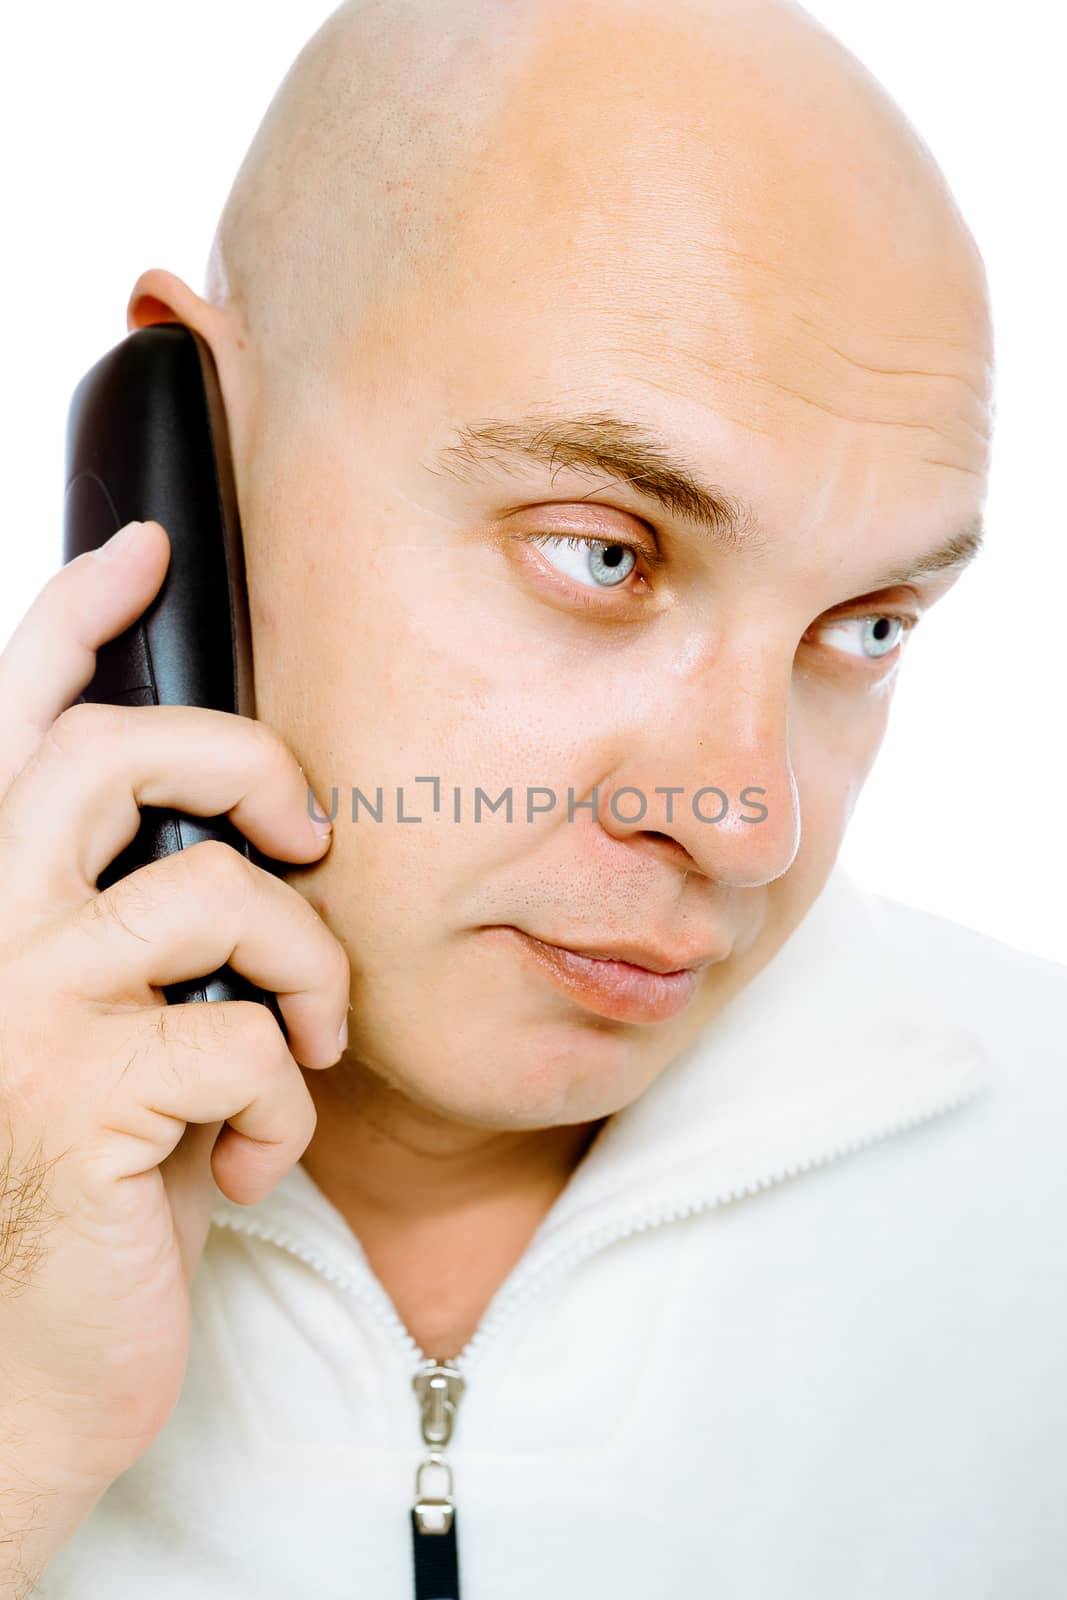 Bald, blue-eyed man in a white jacket with a telephone. Studio. isolated